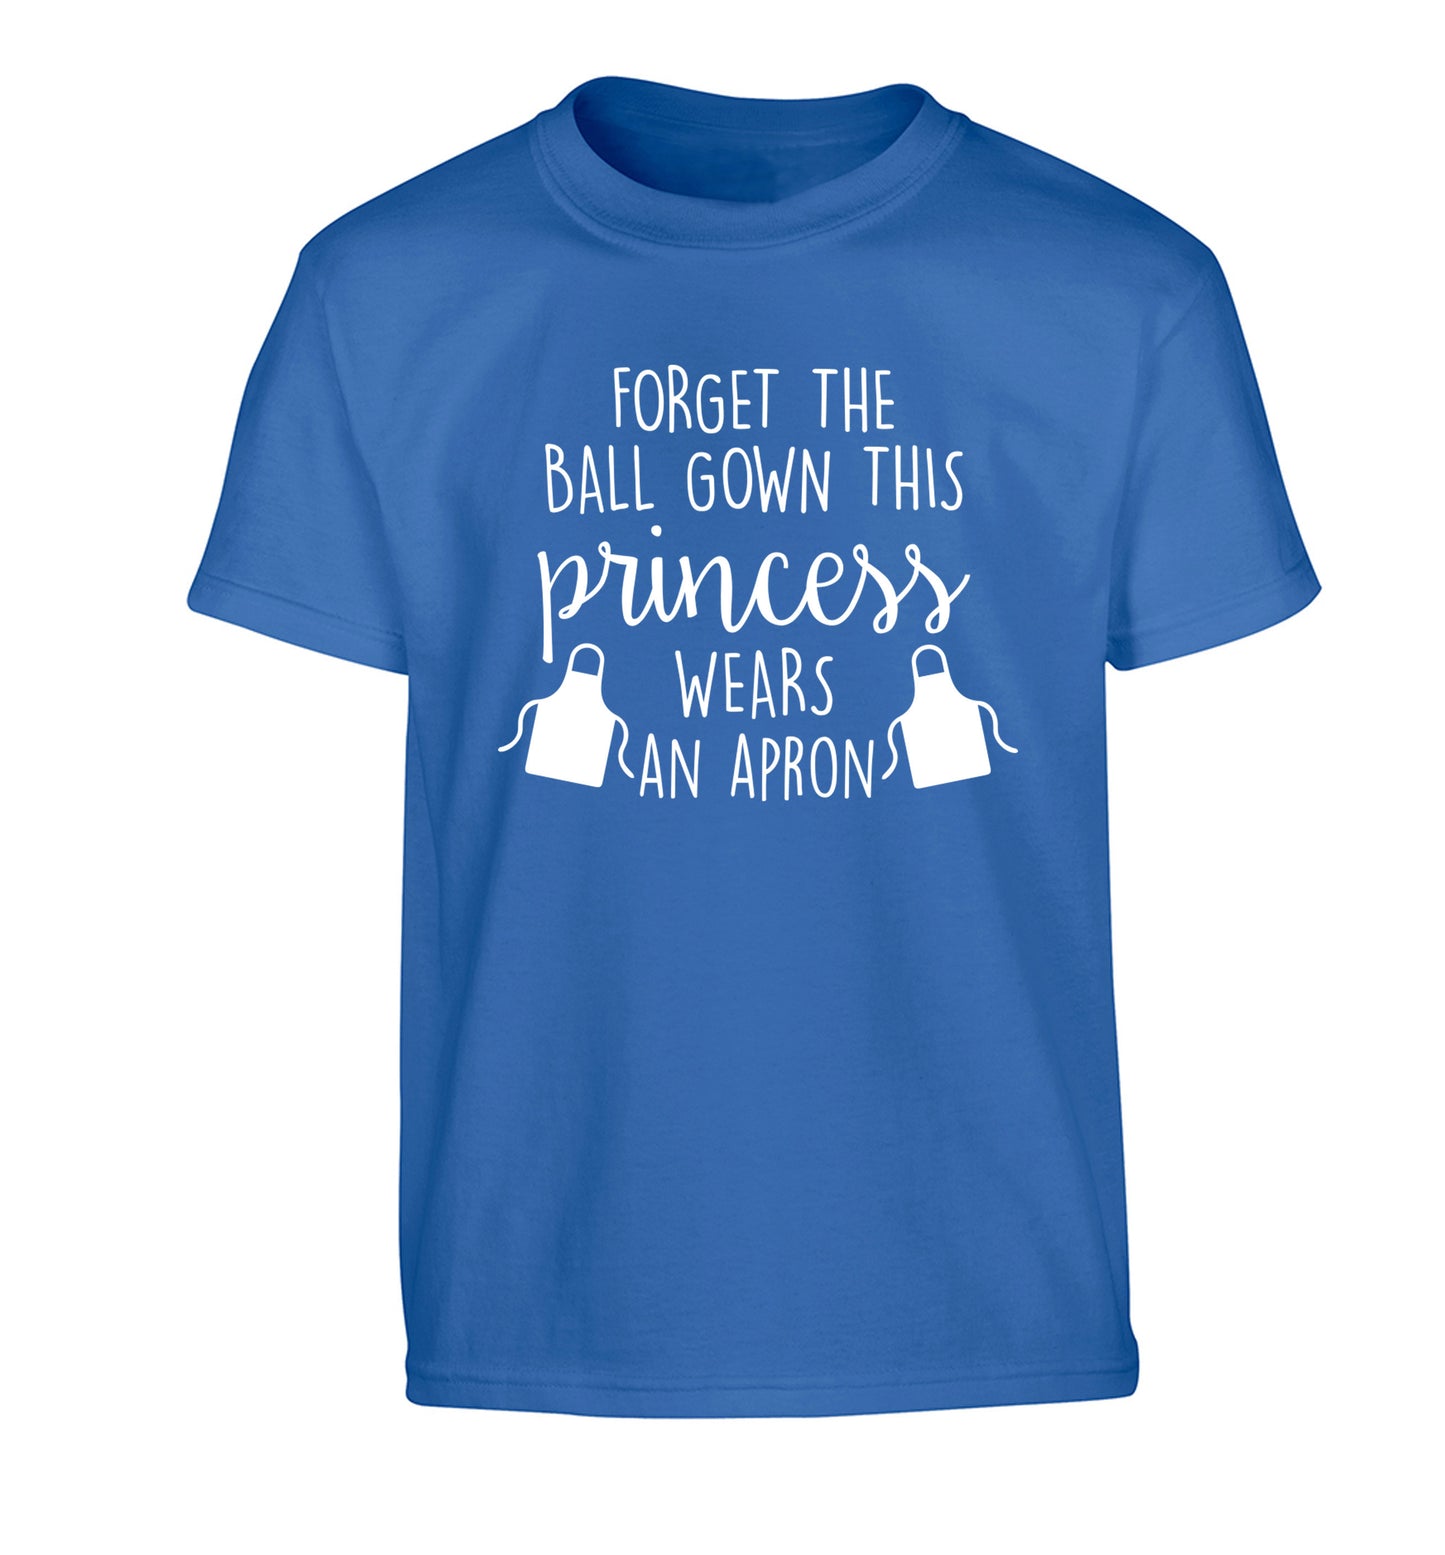 Forget the ball gown this princess wears an apron Children's blue Tshirt 12-14 Years